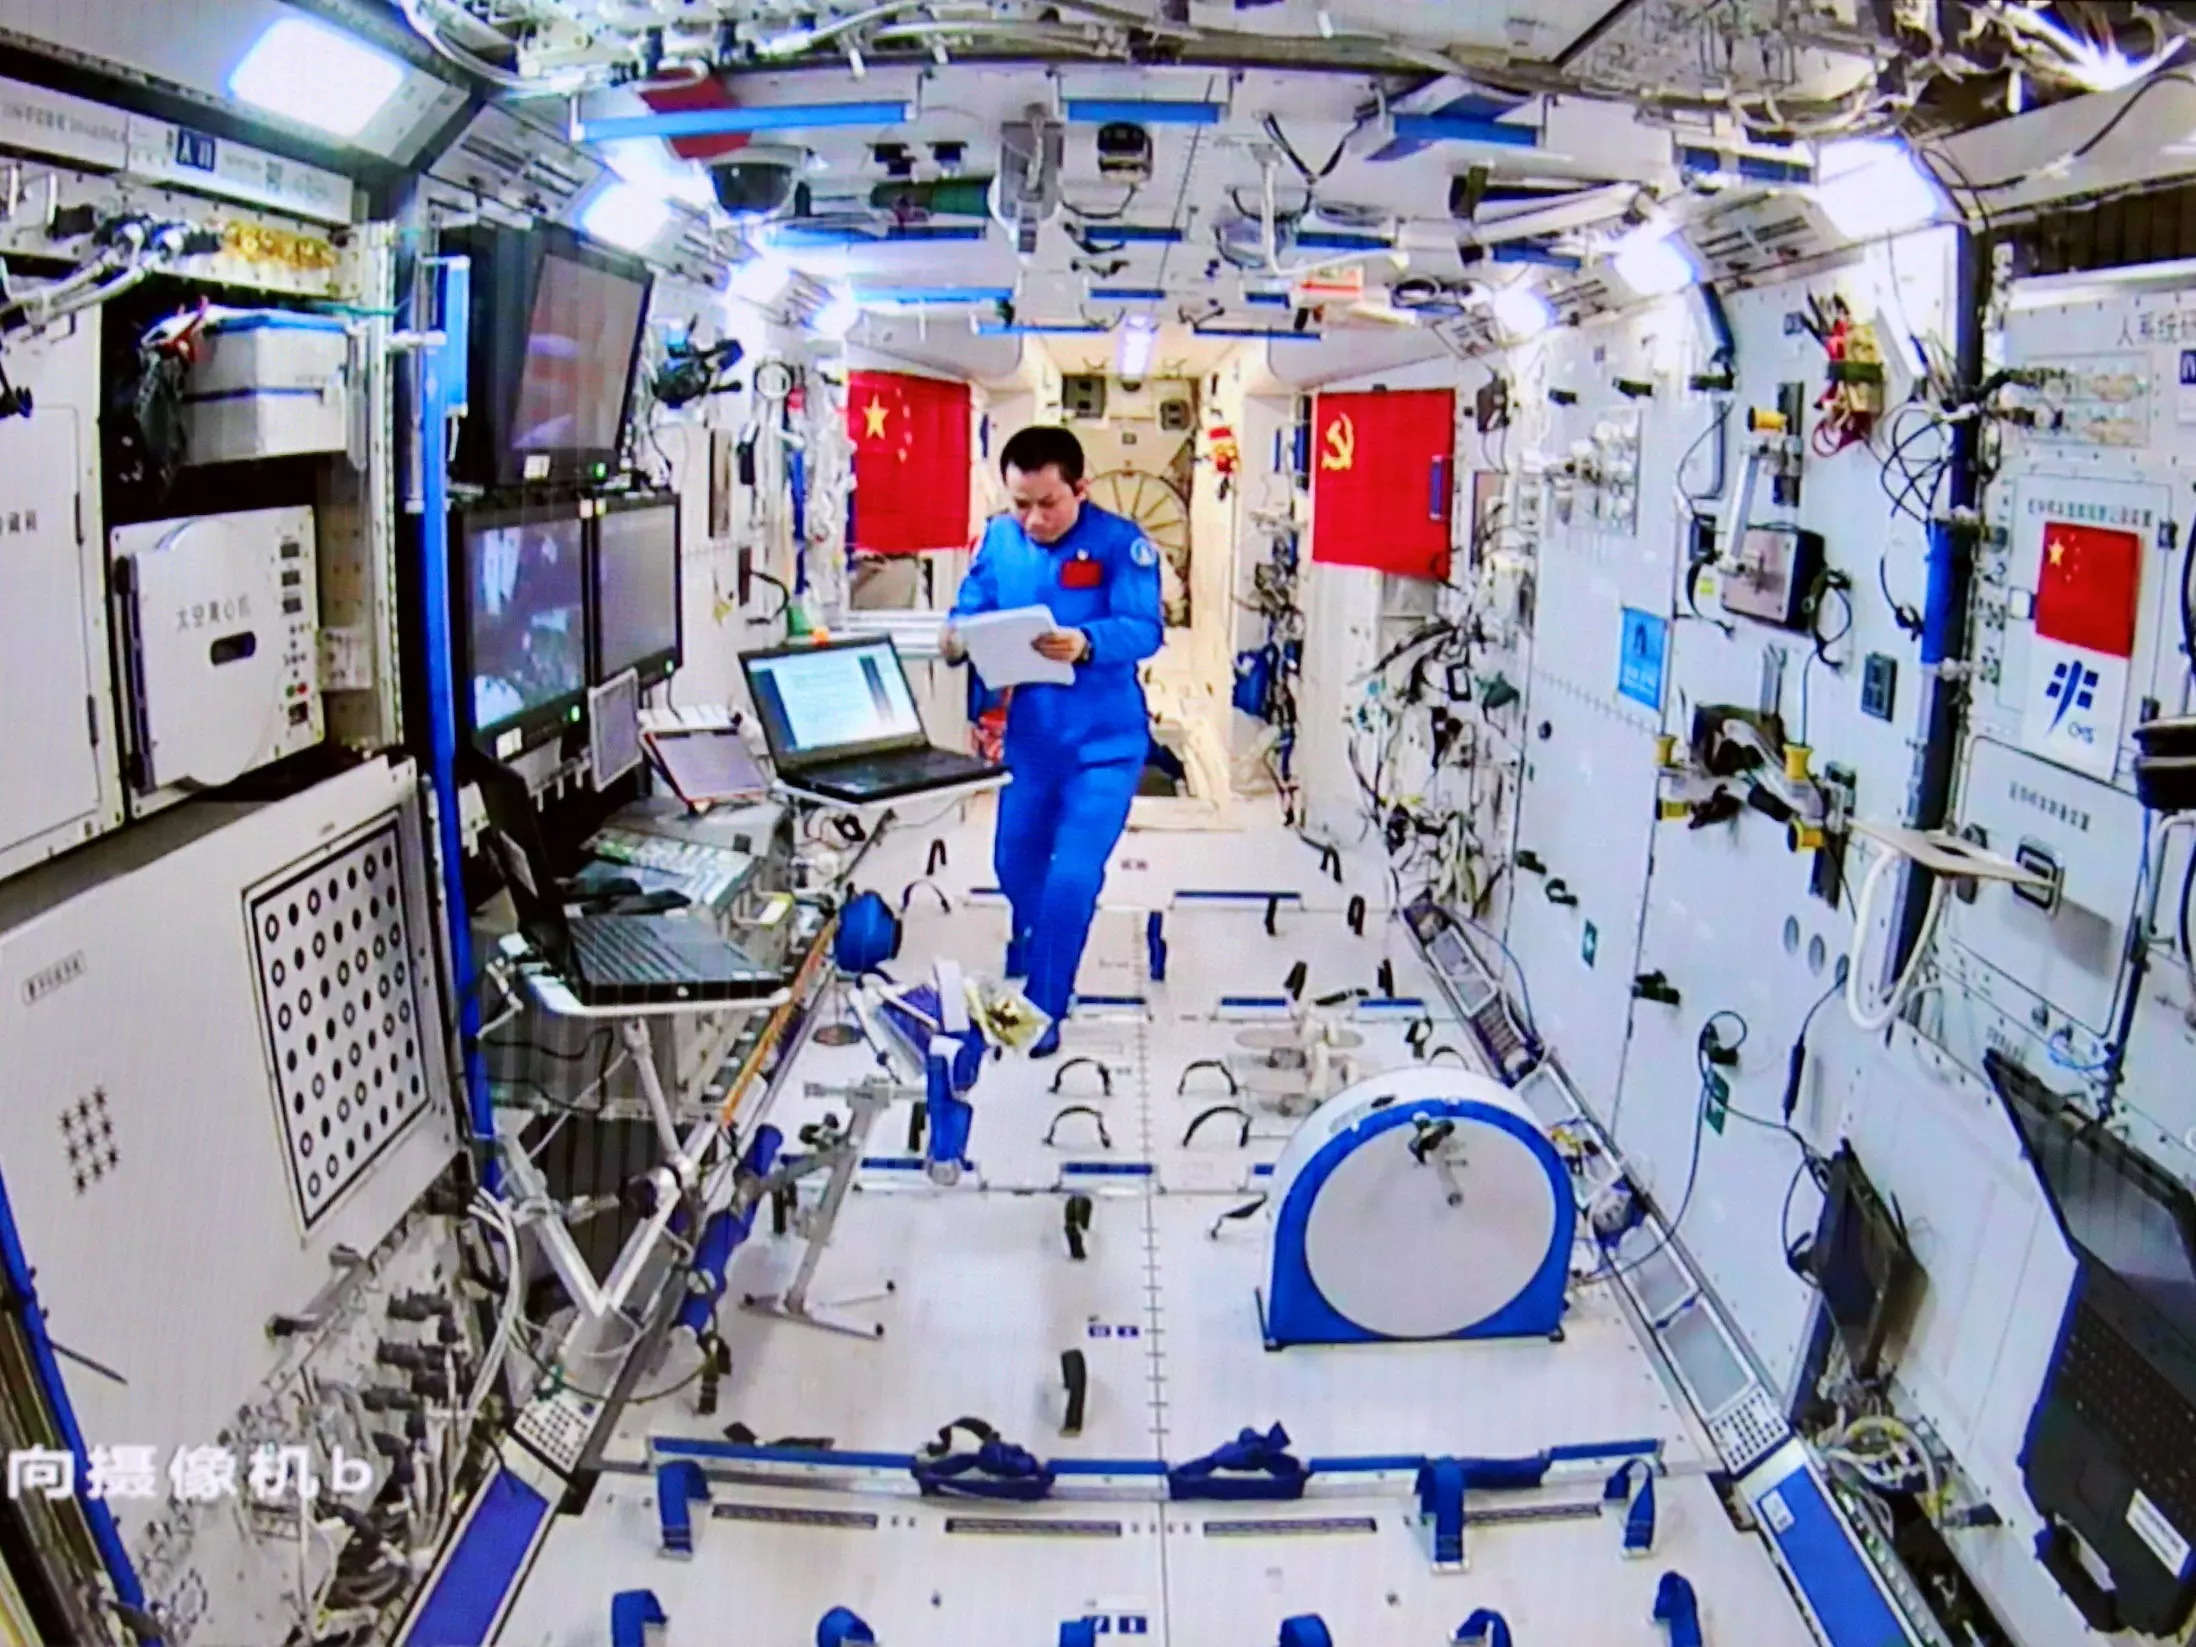 astronaut taikonaut in chinese space station looking at papers wearing blue jumpsuit